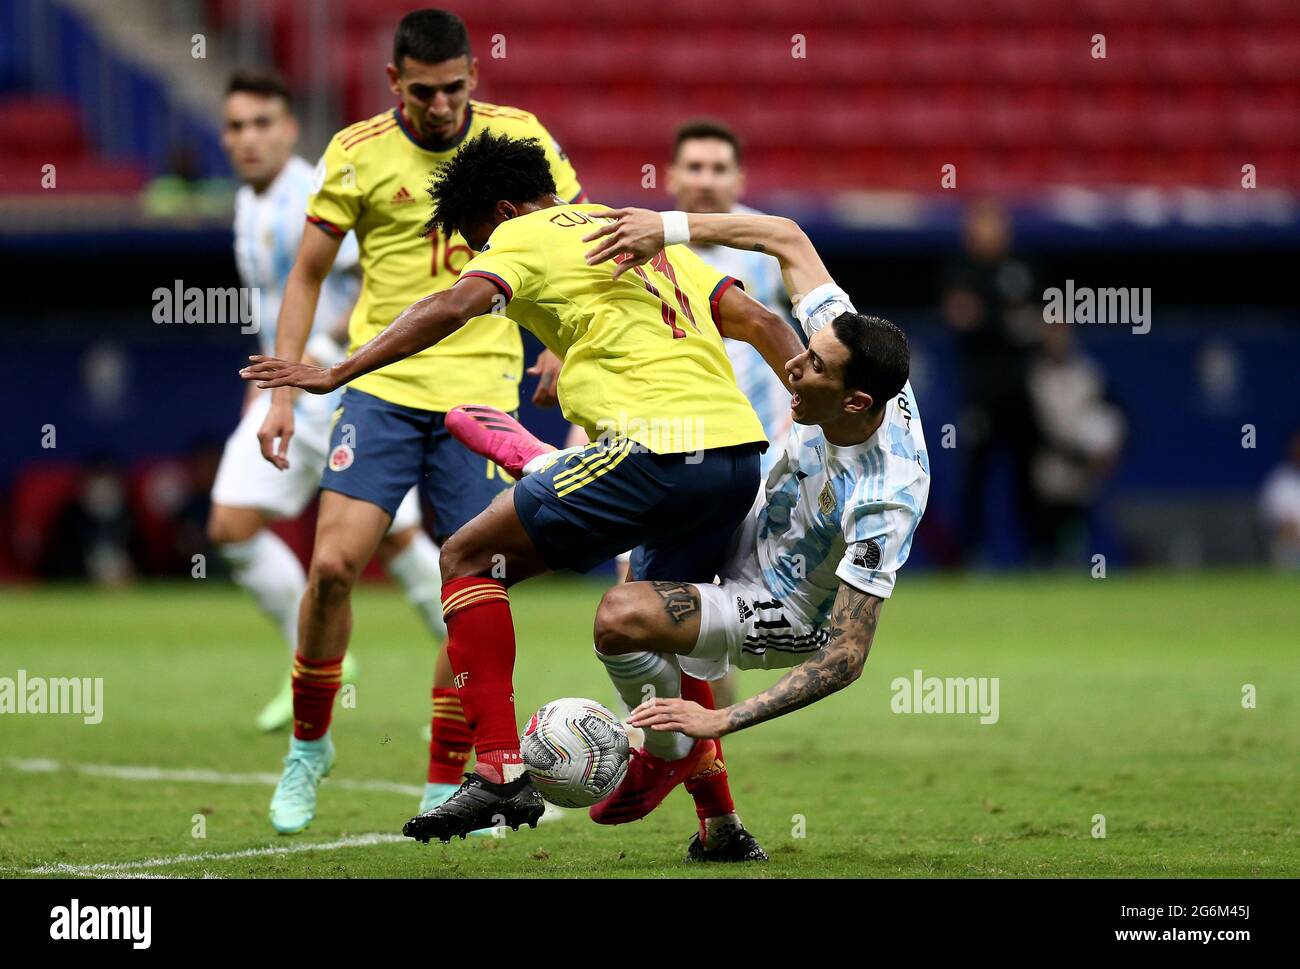 BRASILIA, BRAZIL - JULY 06: Angel Di Maria of Argentina competes for the ball with Juan Cuadrado and Rafael Santos Borre of Colombia ,during the Semifinal match between Argentina and Colombia as part of Conmebol Copa America Brazil 2021 at Mane Garrincha Stadium on July 6, 2021 in Brasilia, Brazil. (MB Media) Stock Photo